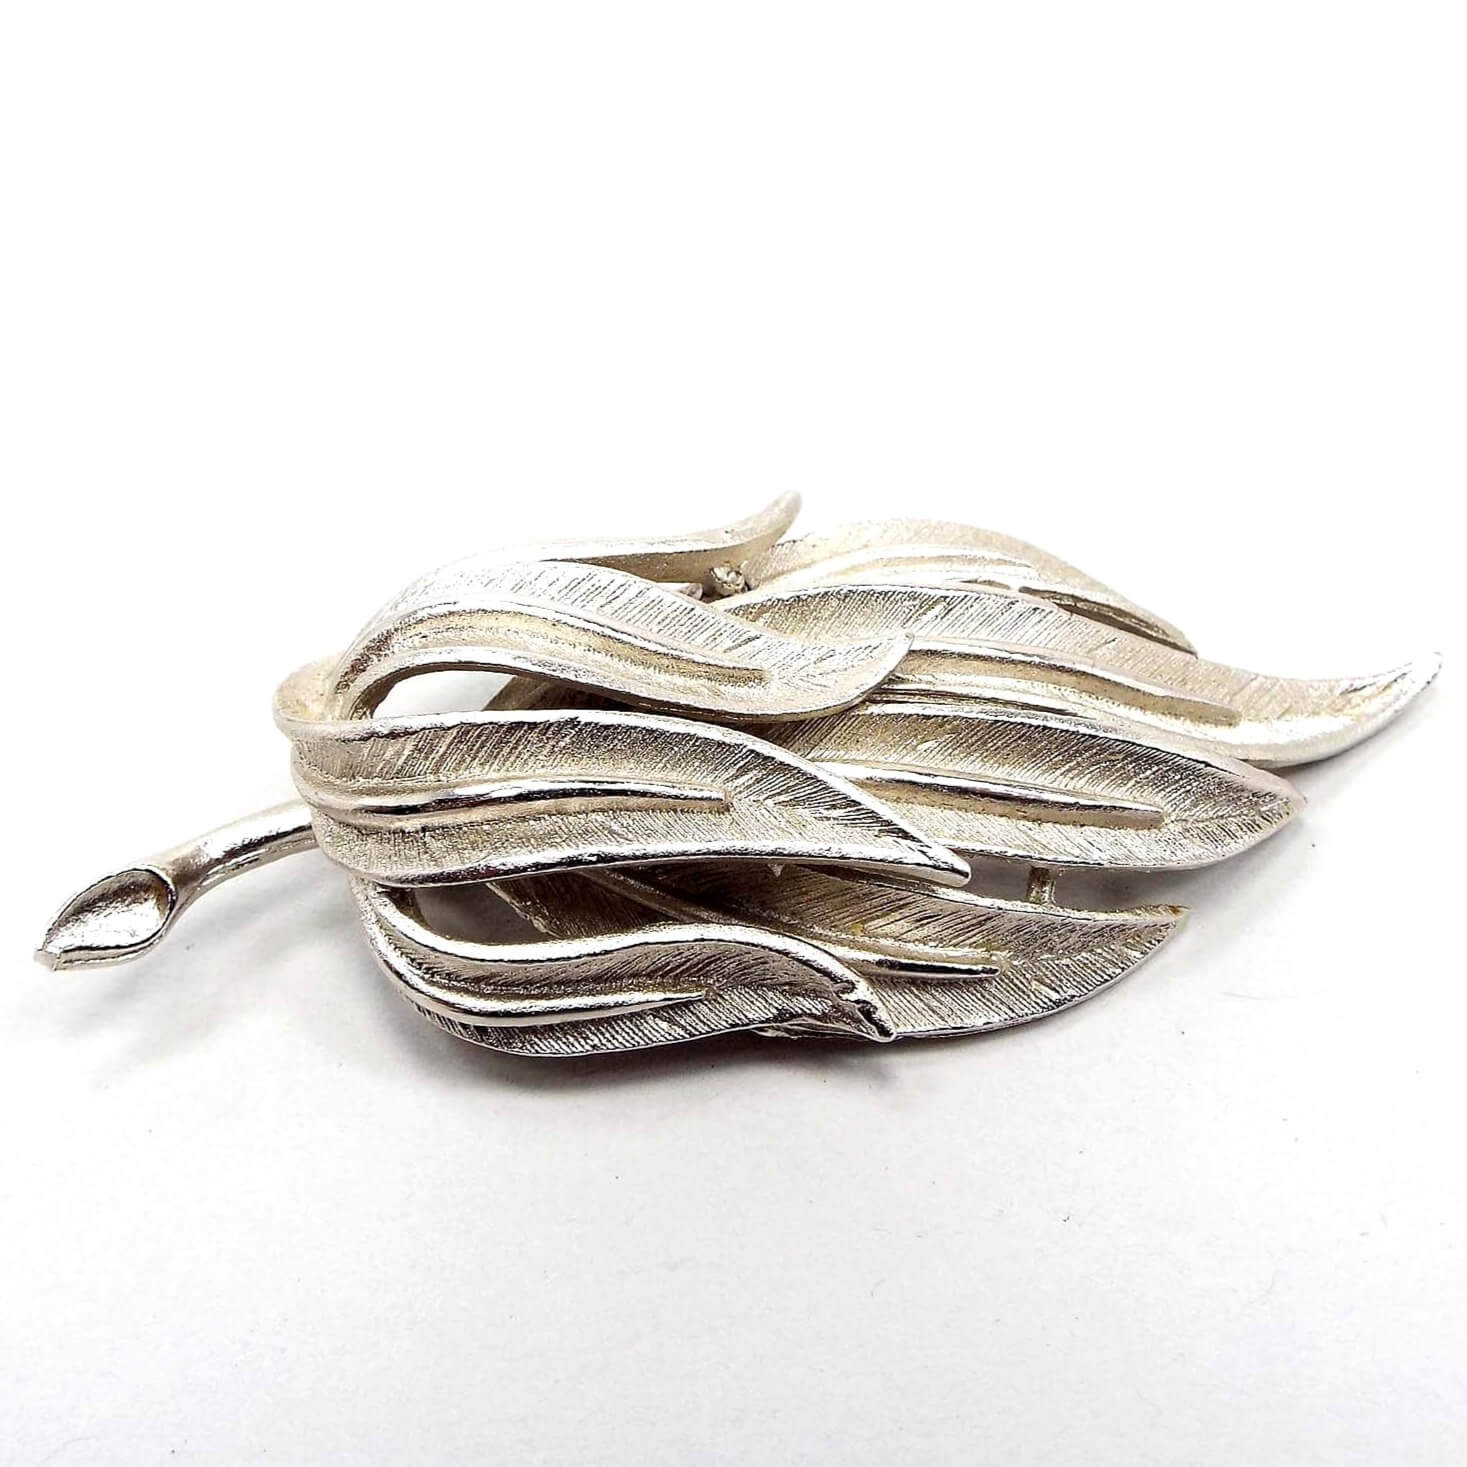 Front view of the Coro Mid Century vintage branch brooch pin. It is silver tone in color with a matte textured design of long leaves on the end.